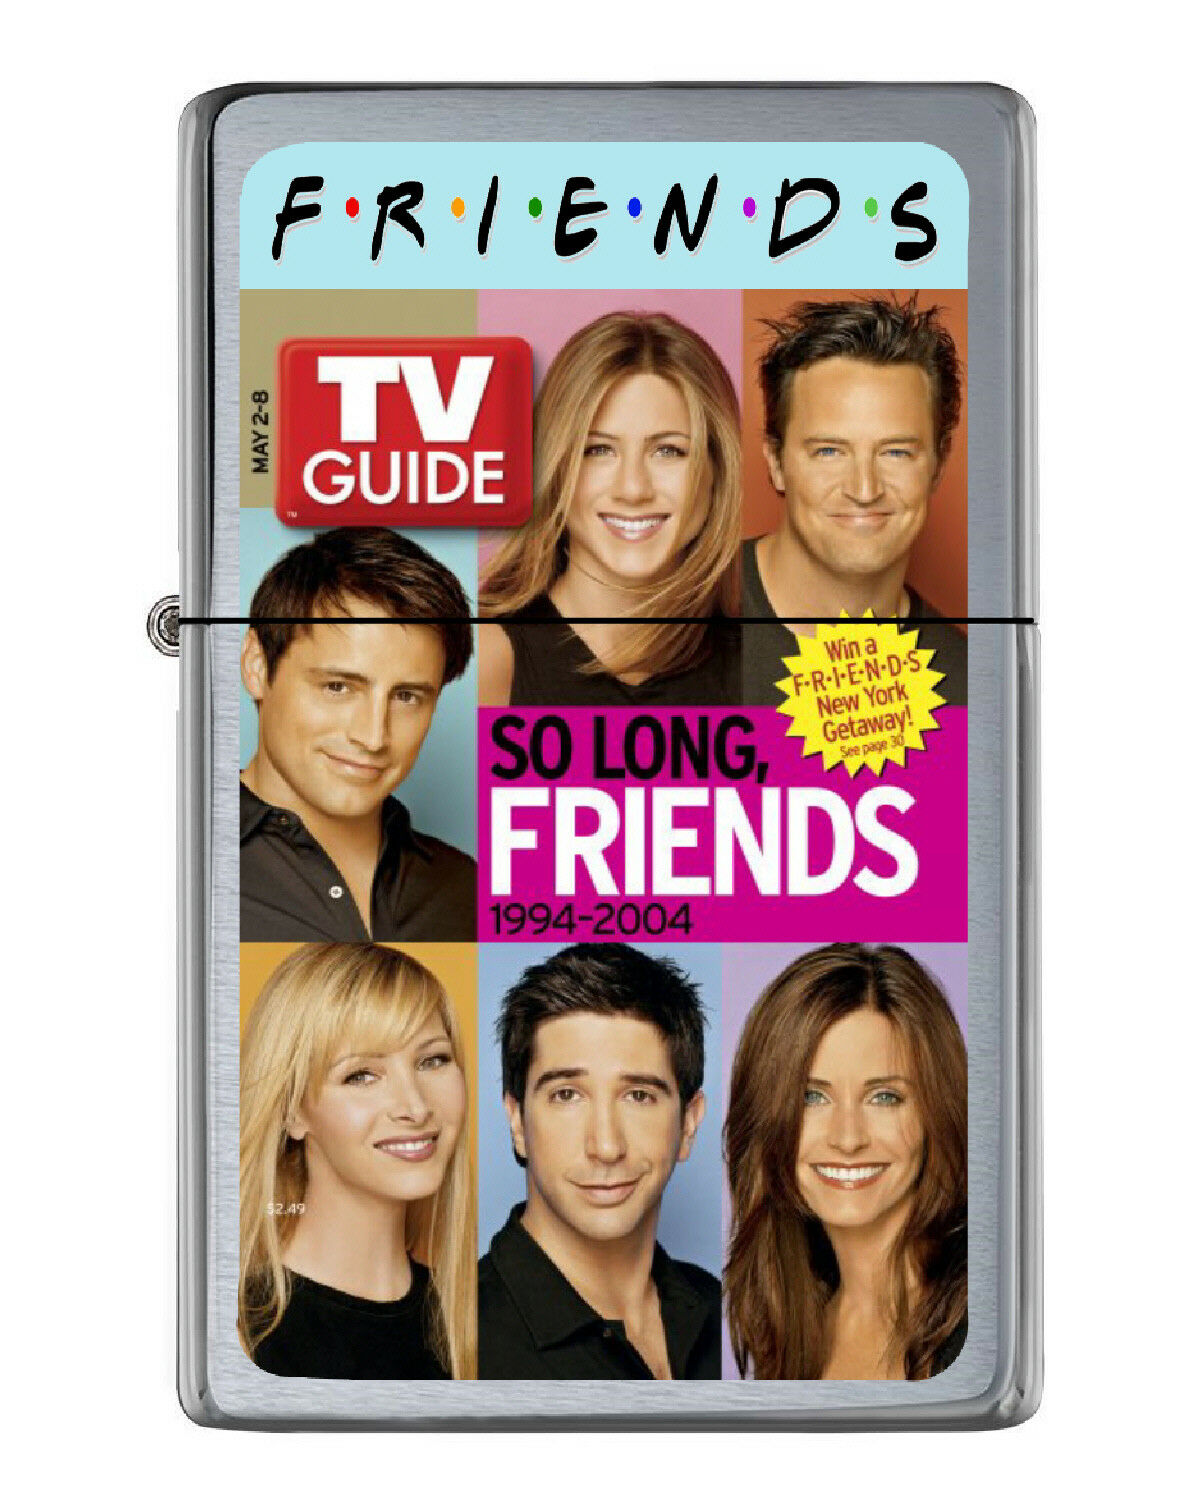 FRIENDS TV Guide Show Flip Top Lighter Brushed Chrome with Vinyl Image.